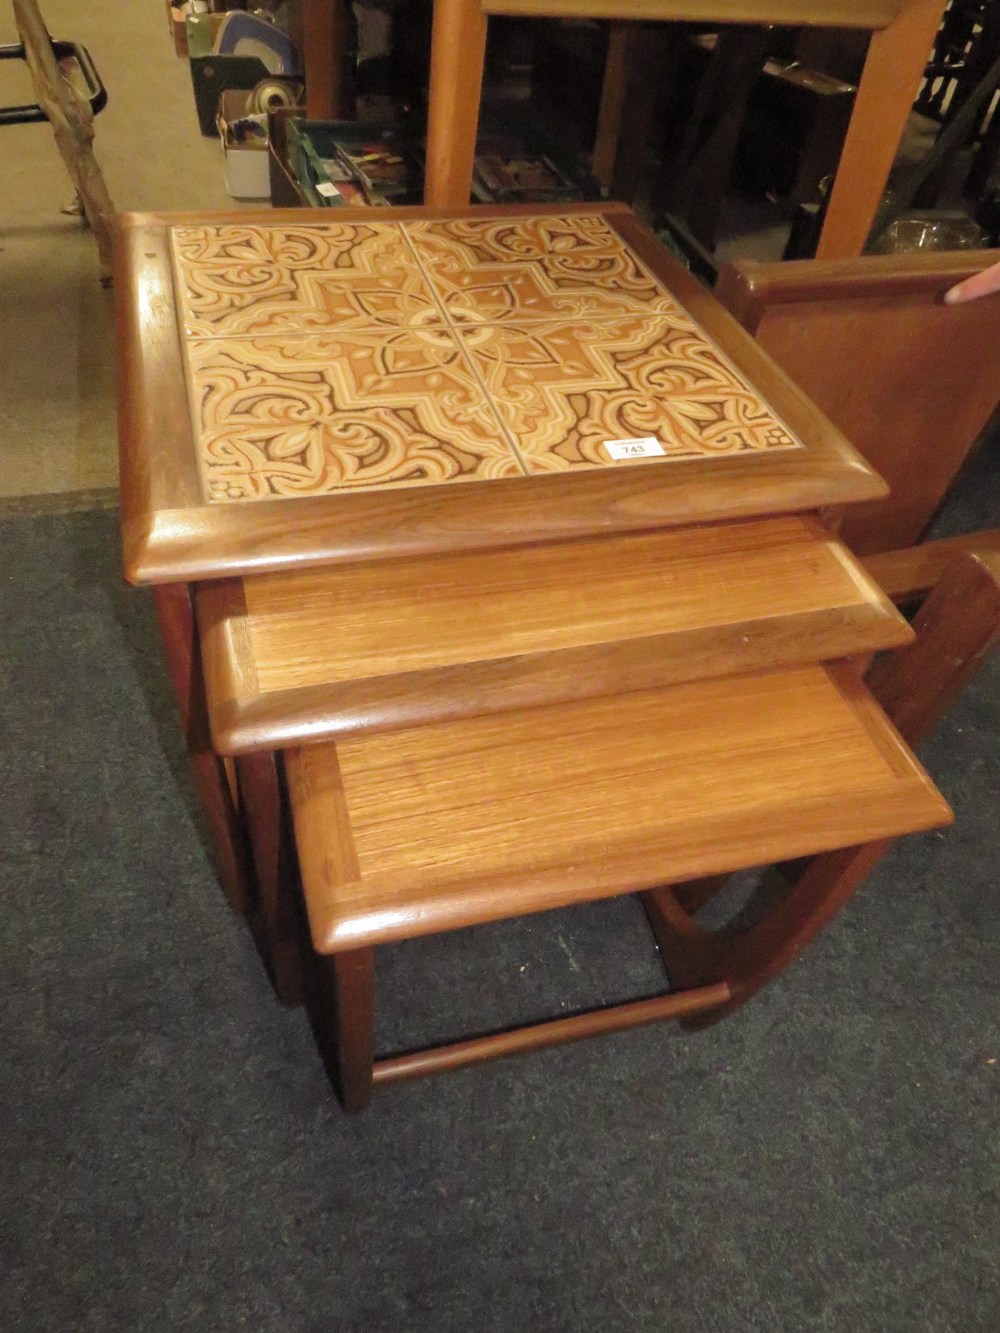 A MID CENTURY G-PLAN TEAK NEST OF TABLES TOGETHER WITH A G-PLAN COFFEE TABLE (MINUS GLASS) A/F (2) - Image 4 of 5